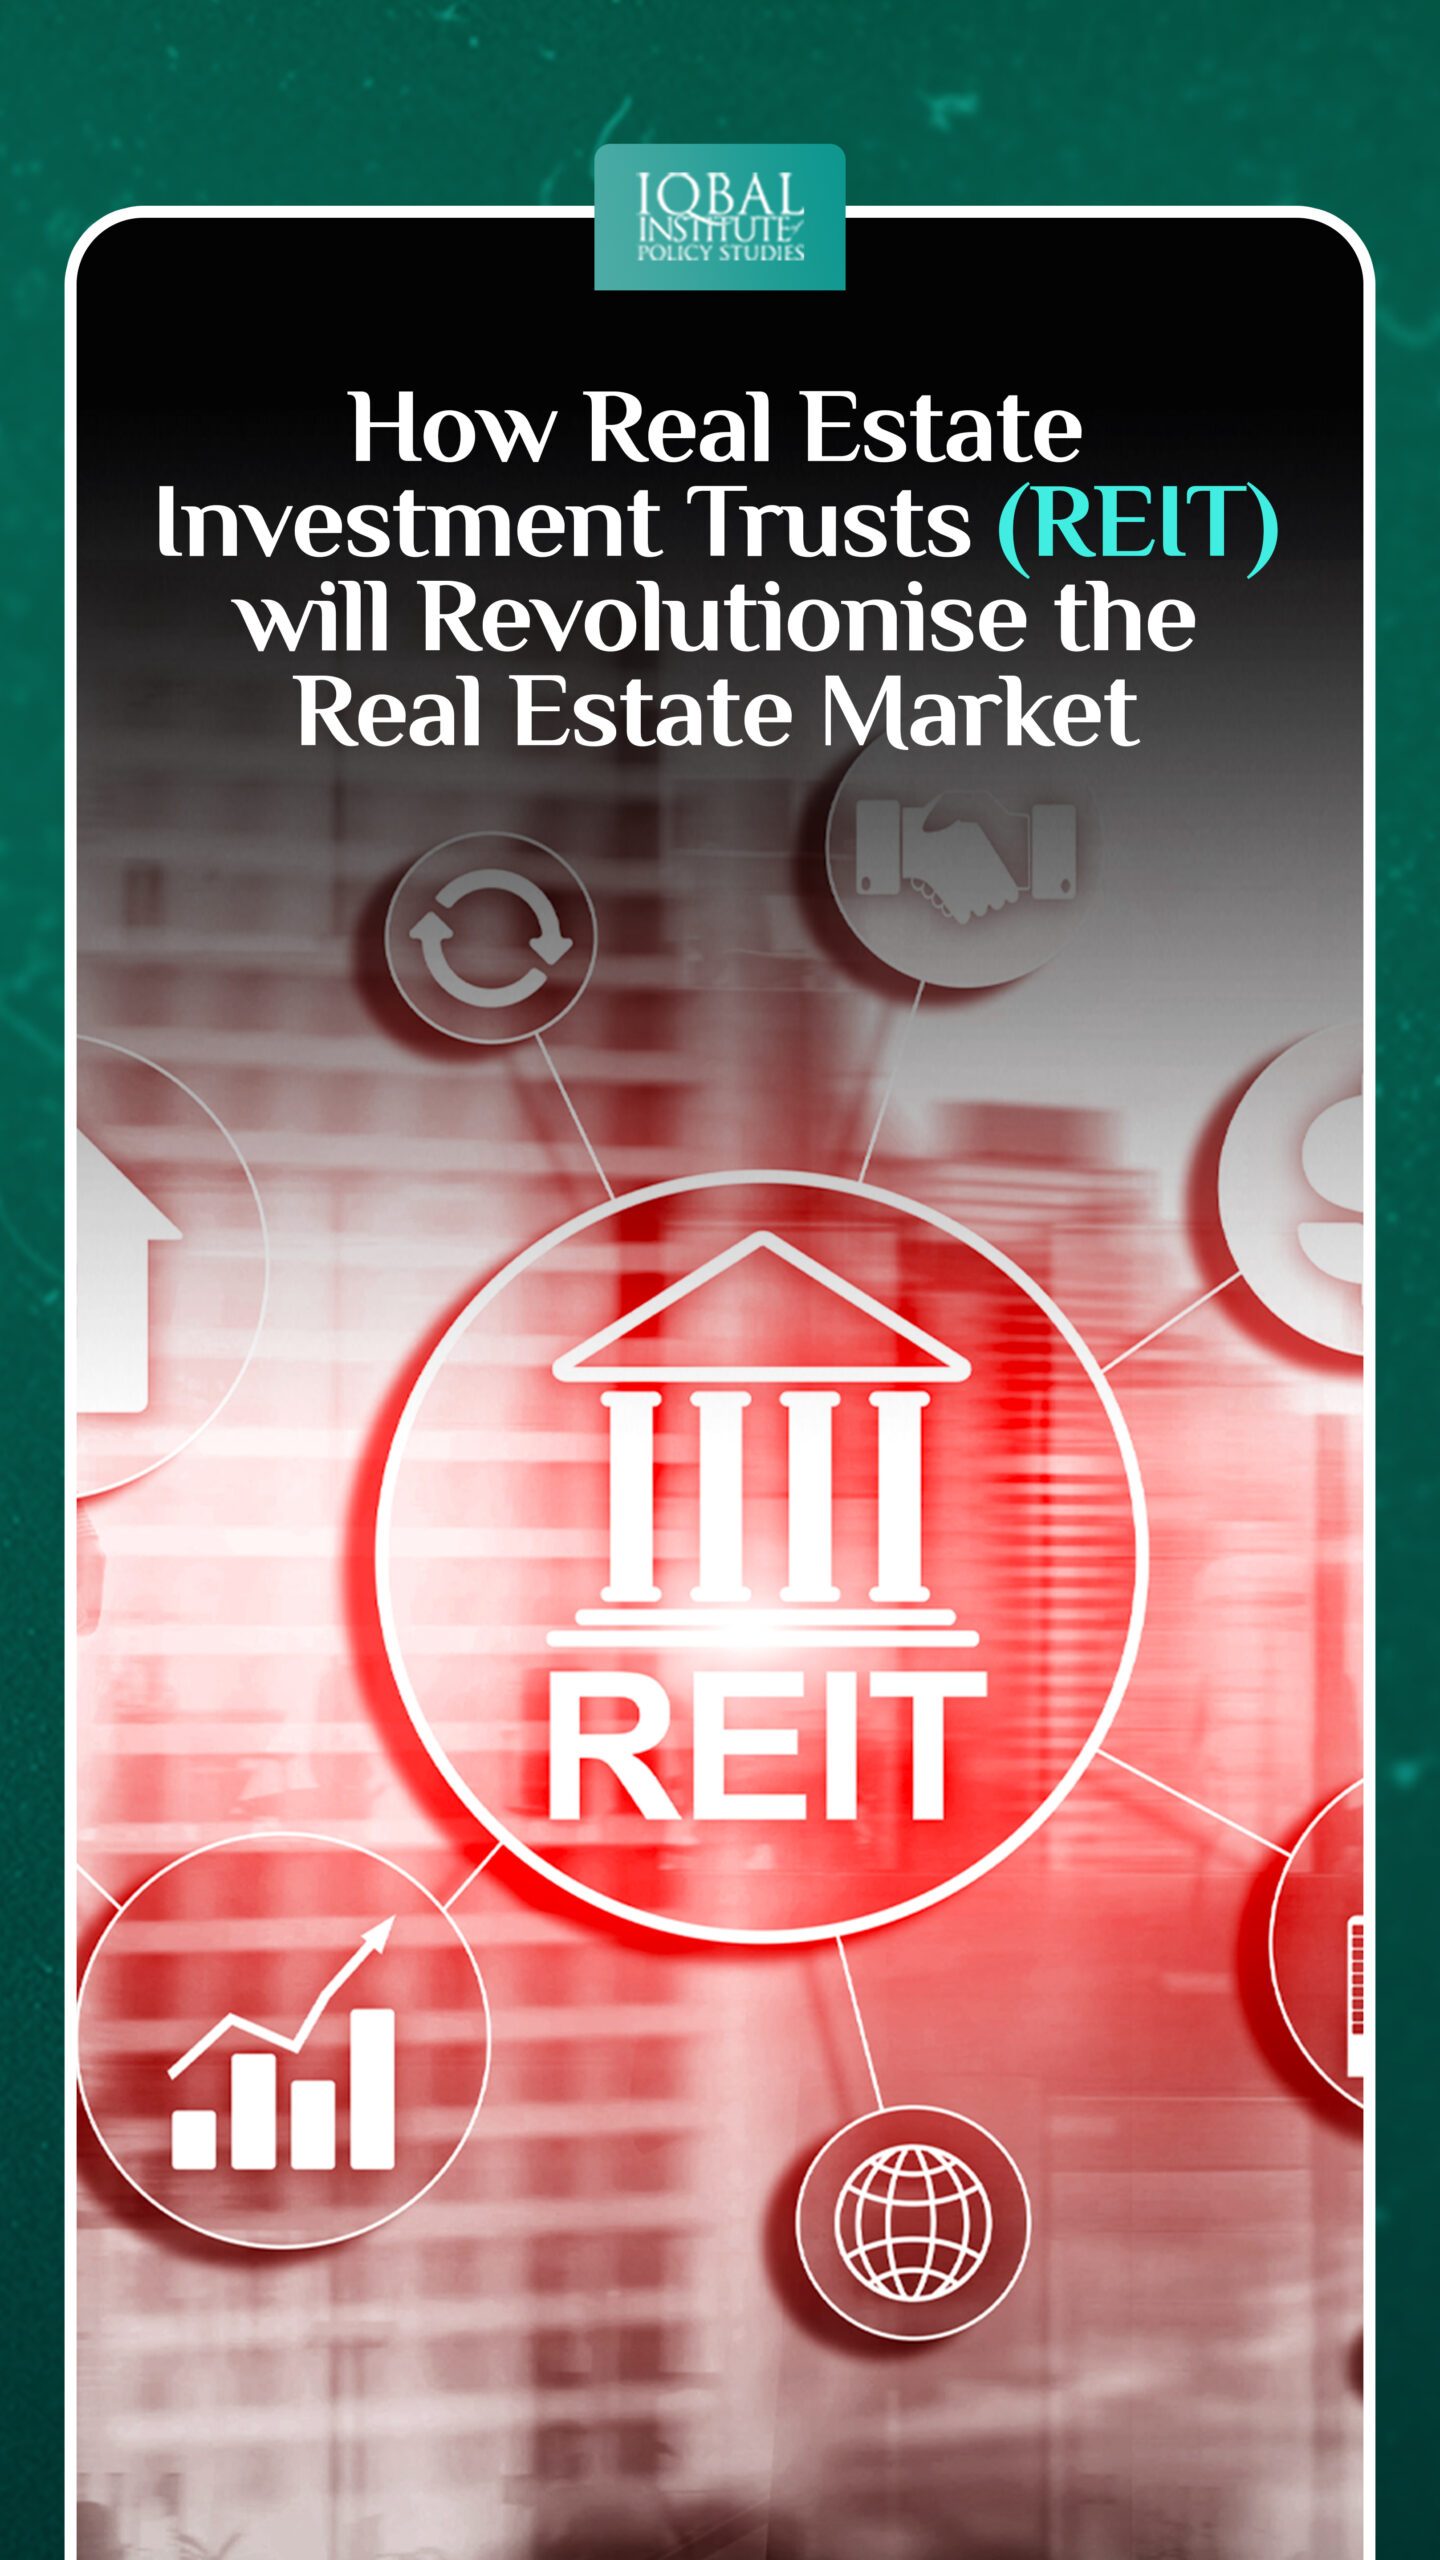 How Real Estate Investment Trusts (REIT) Will Revolutionise the Real Estate Market